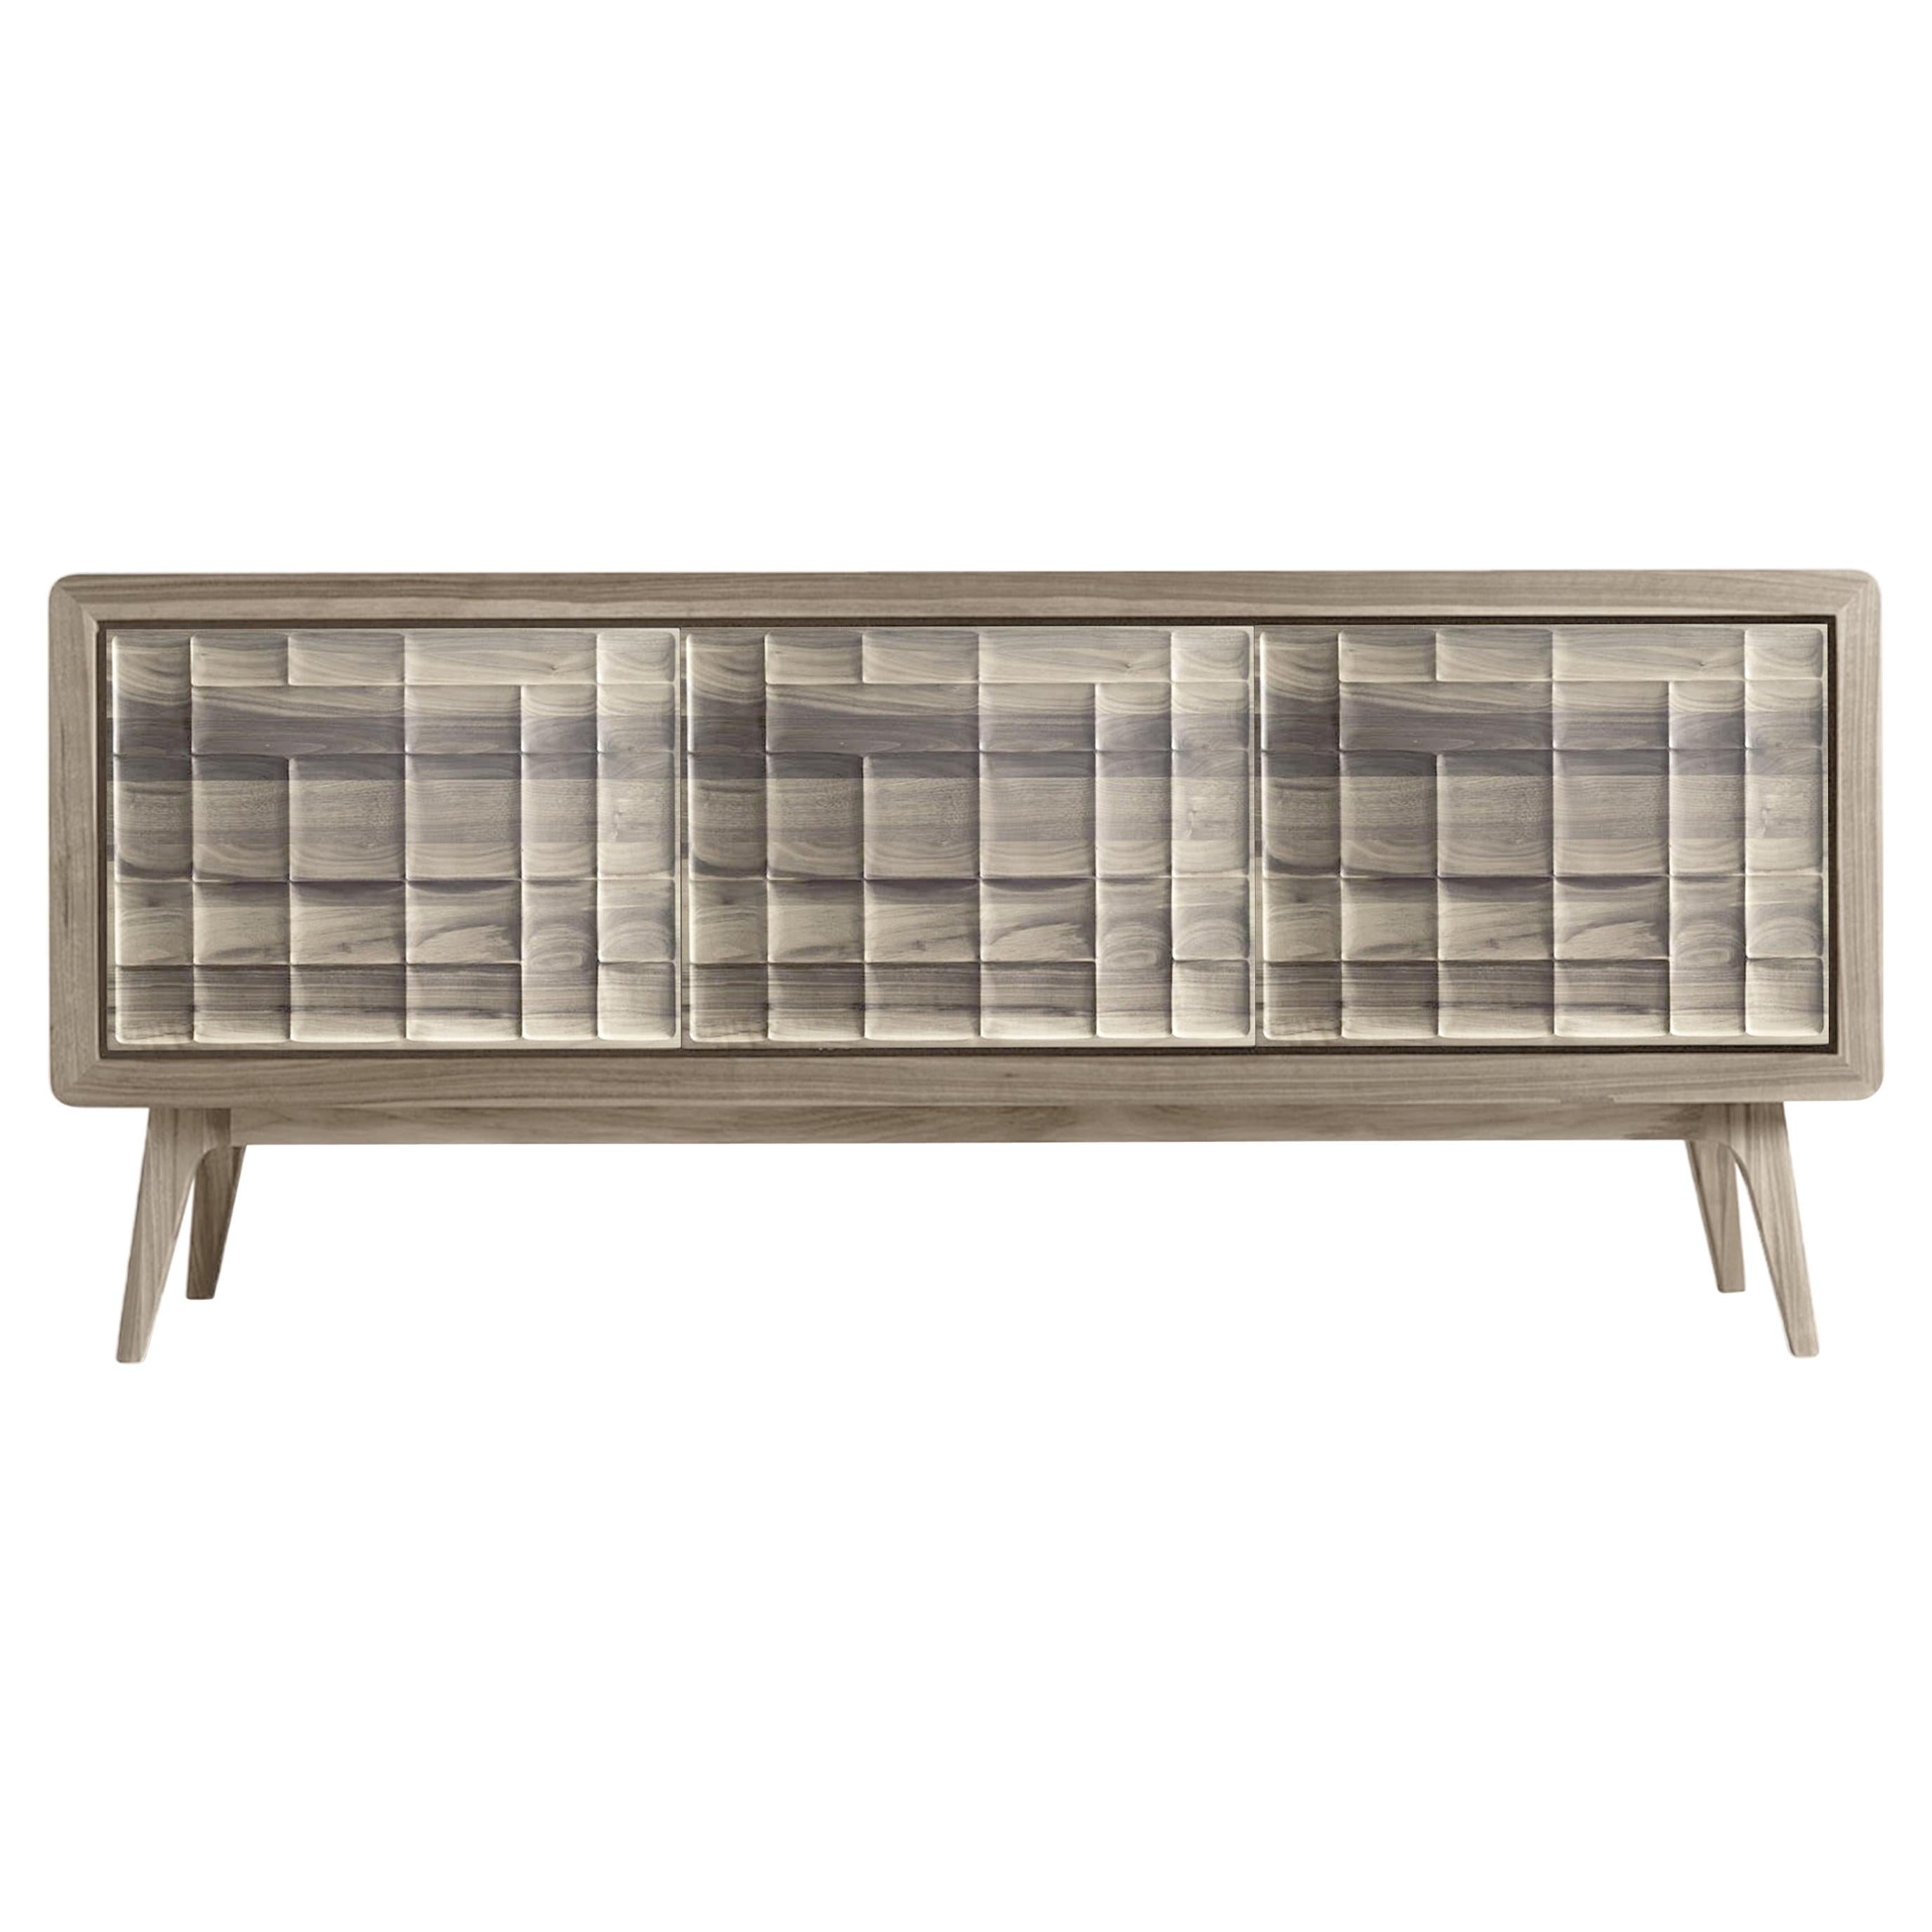 Artes Scacco Solid Wood Sideboard, Walnut Natural Grey Finish, Contemporary For Sale